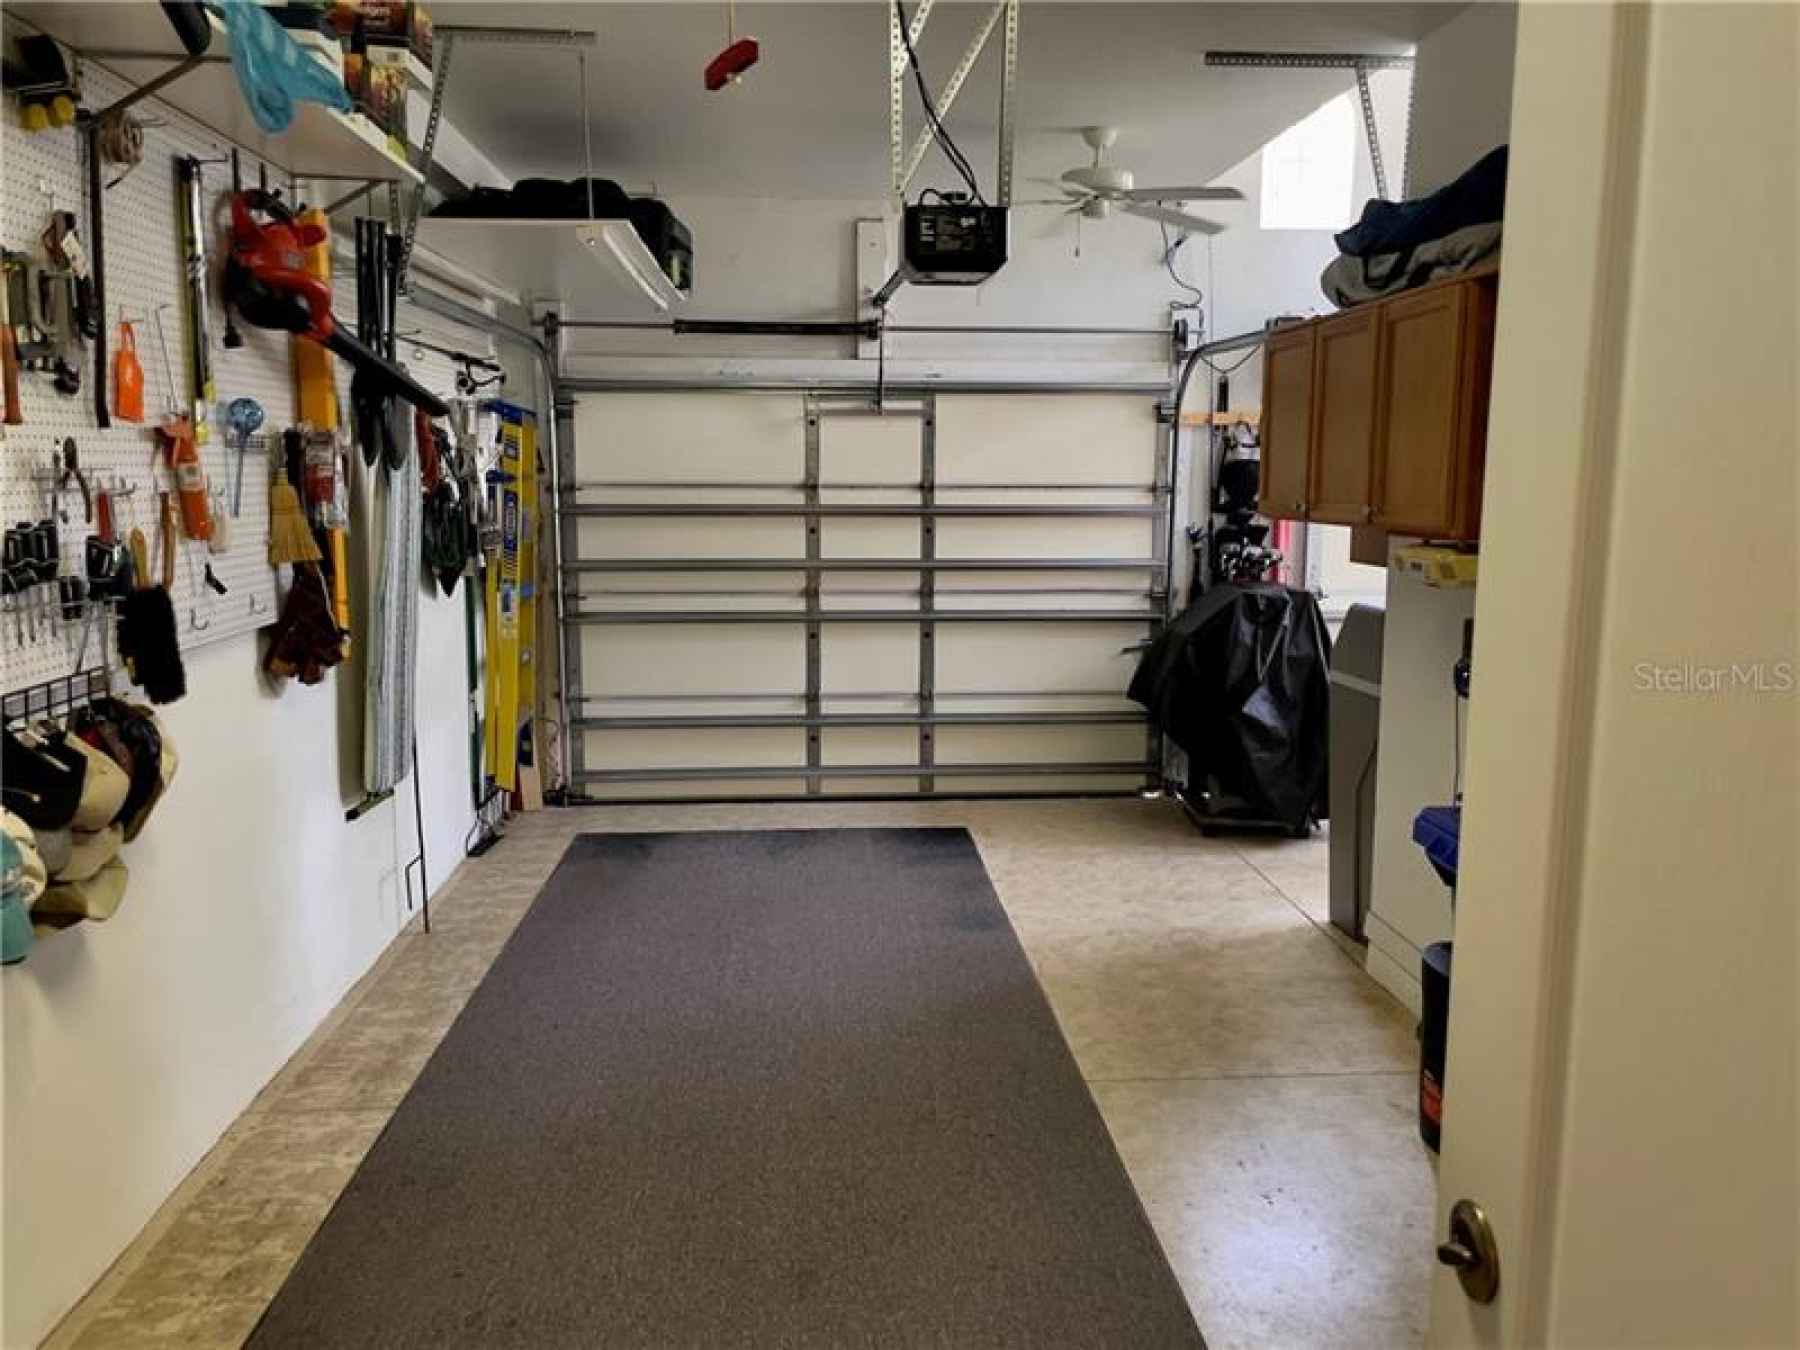 Garage.  Notice the cupboards for extra storage.